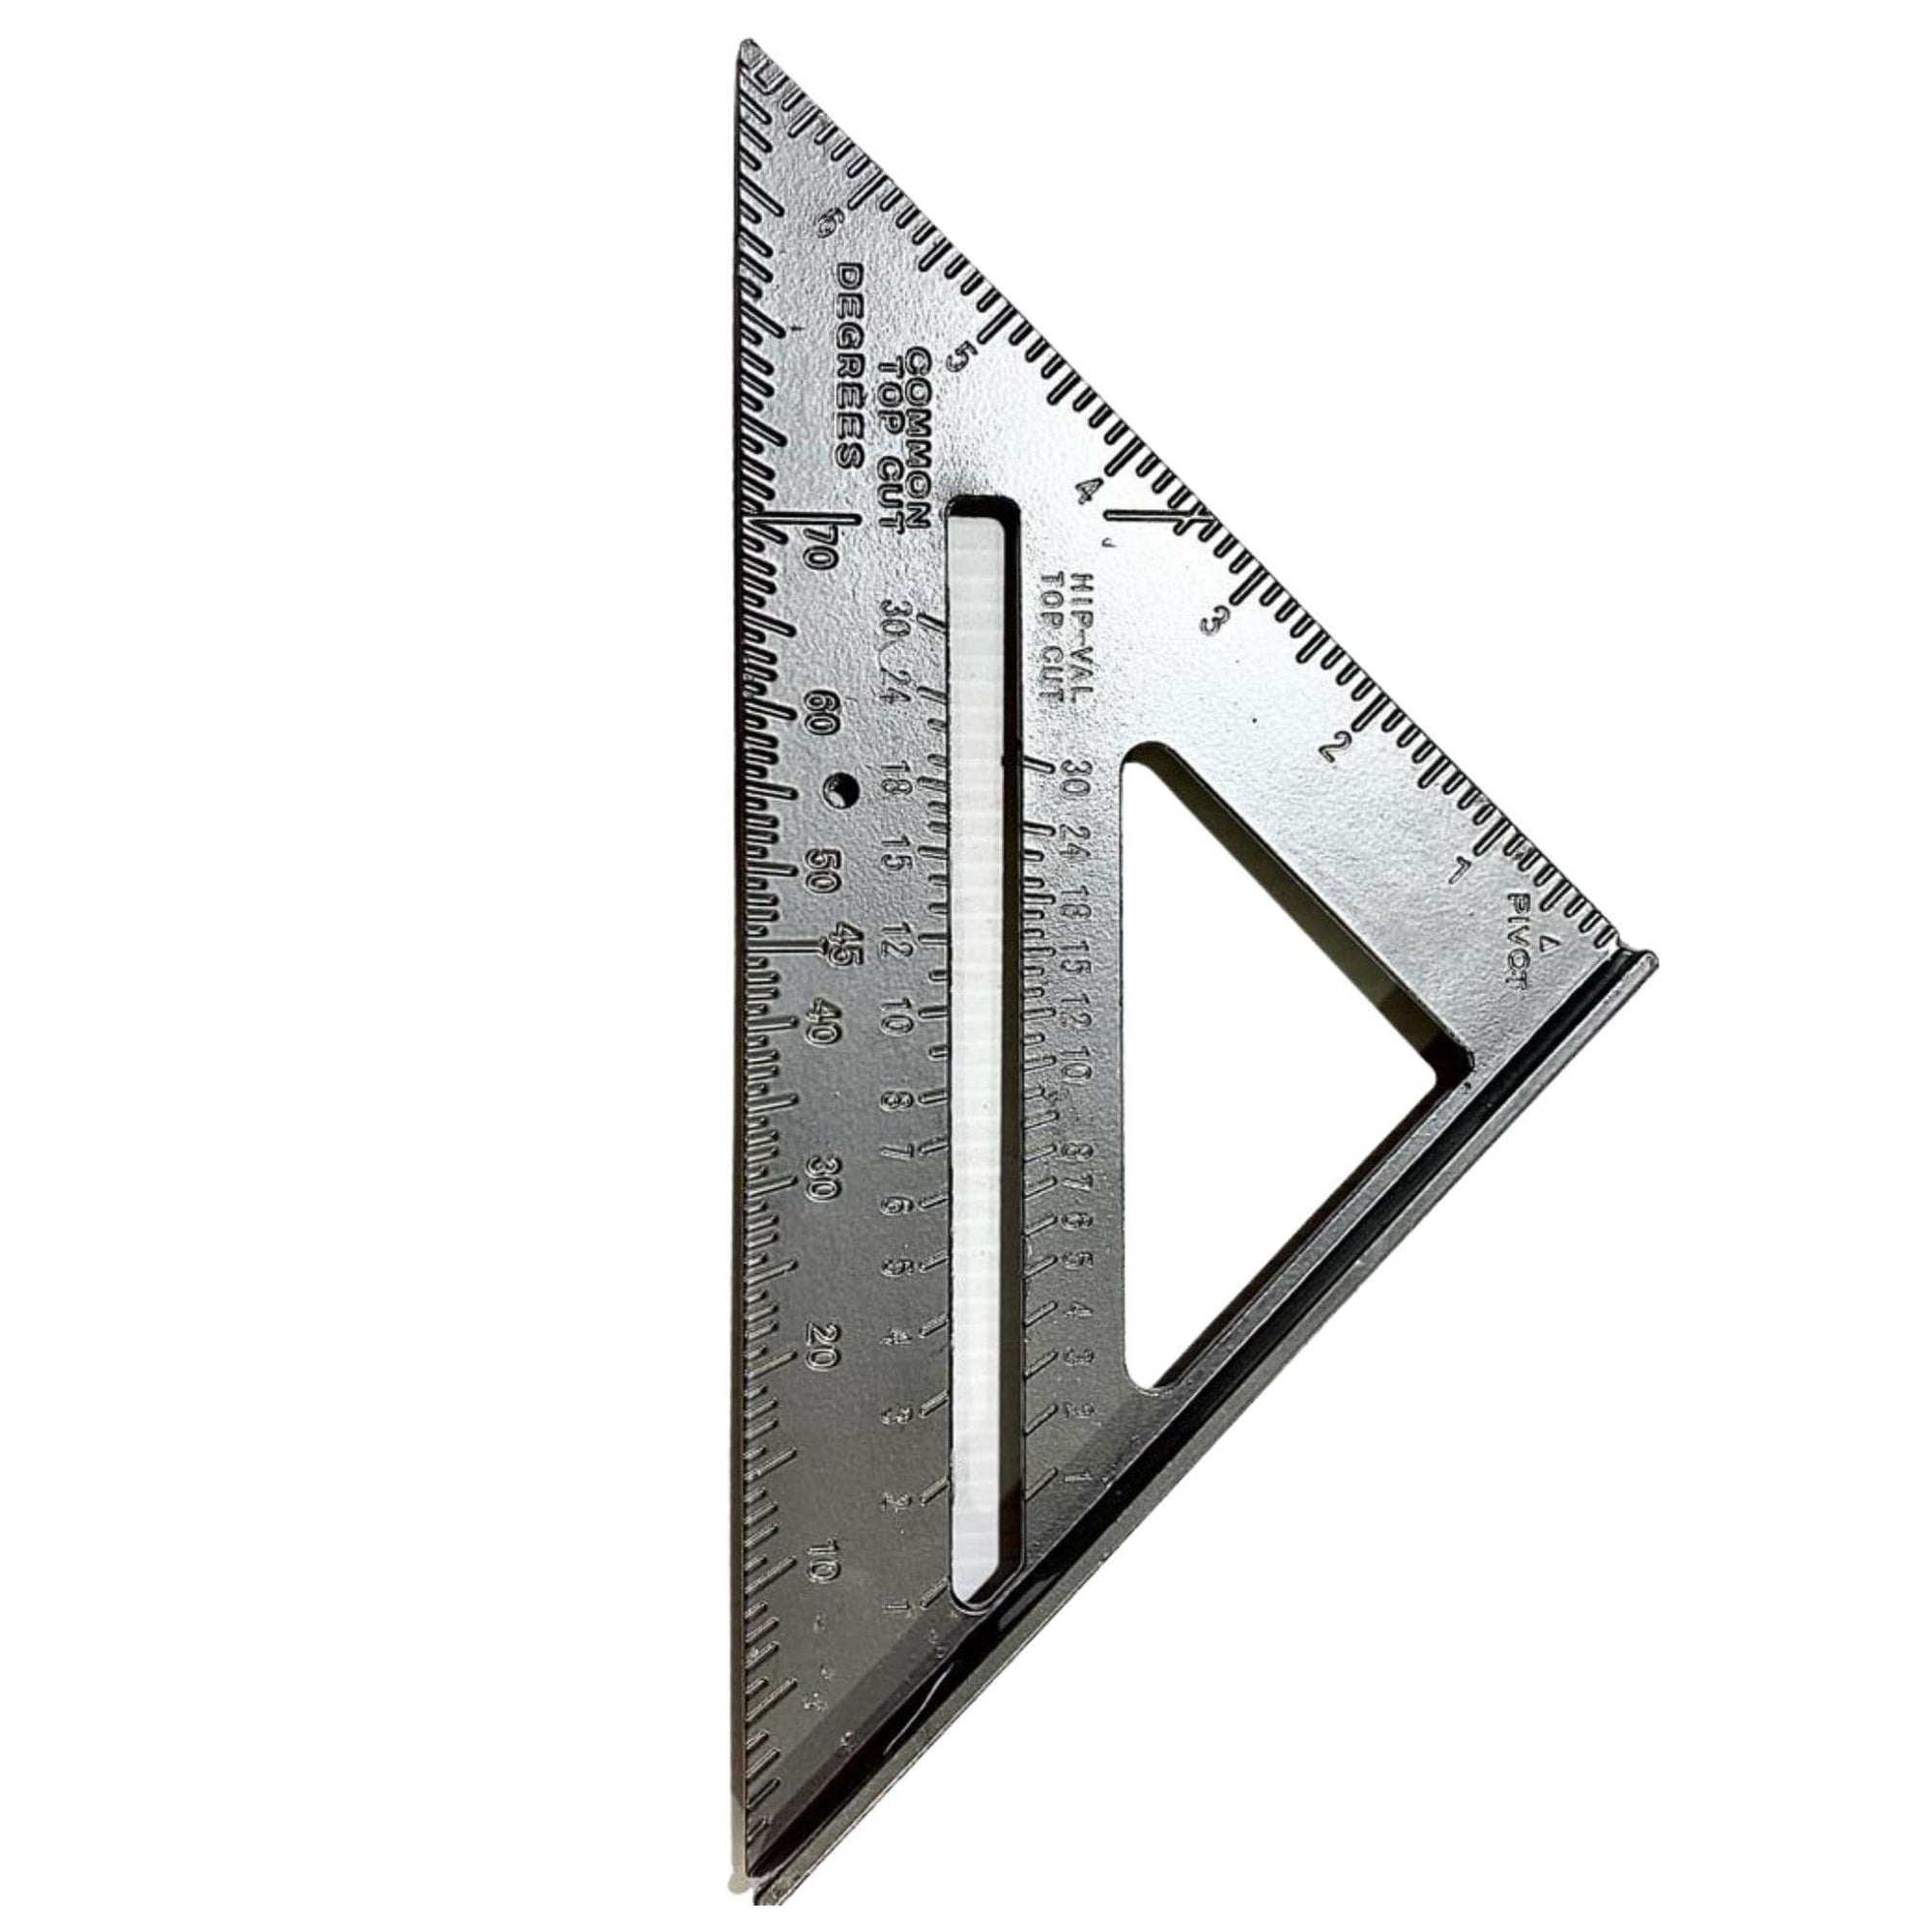 7" Professional Aluminium Alloy Measuring Rafter Square Table - South East Clearance Centre